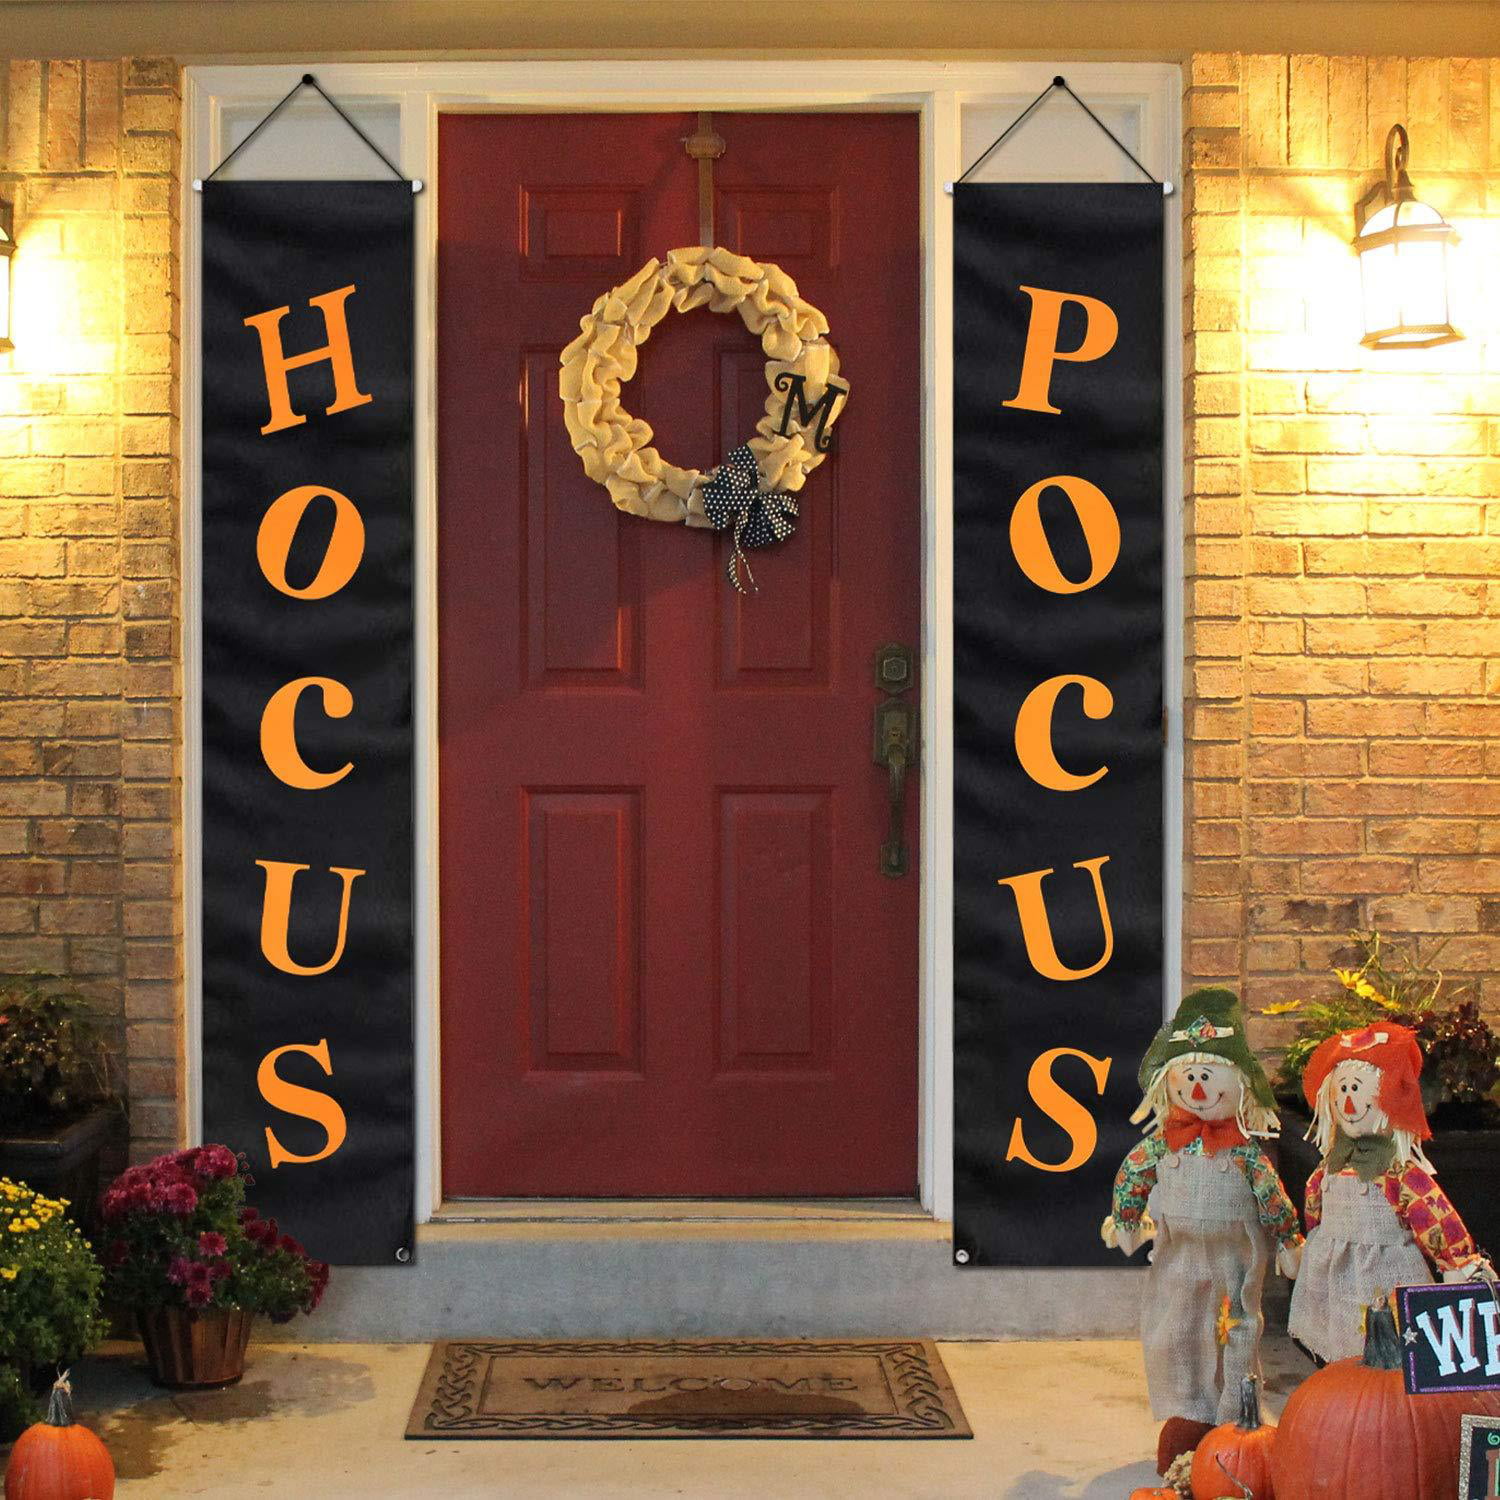 For Front Door Outside Yard Garland Party Supplies Trick Or Treat Hocus Pocus Large Witch Banners Porch Signs ORIENTAL CHERRY Halloween Decorations Outdoor Halloween Decor Orange Black 